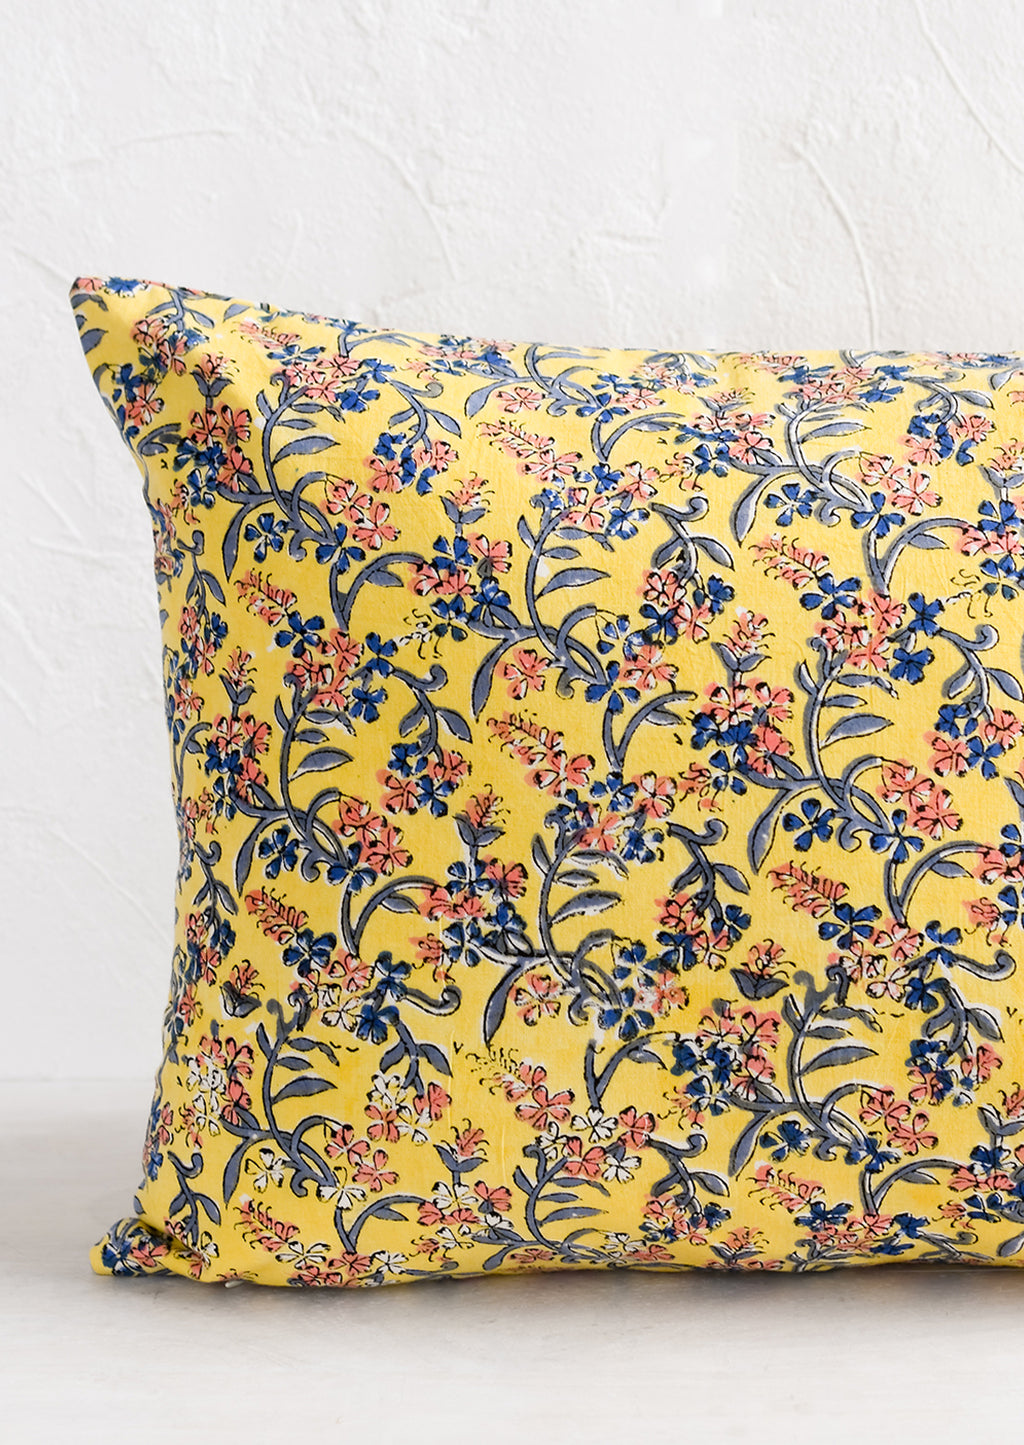 3: A block printed throw pillow in yellow with blue and pink floral print.